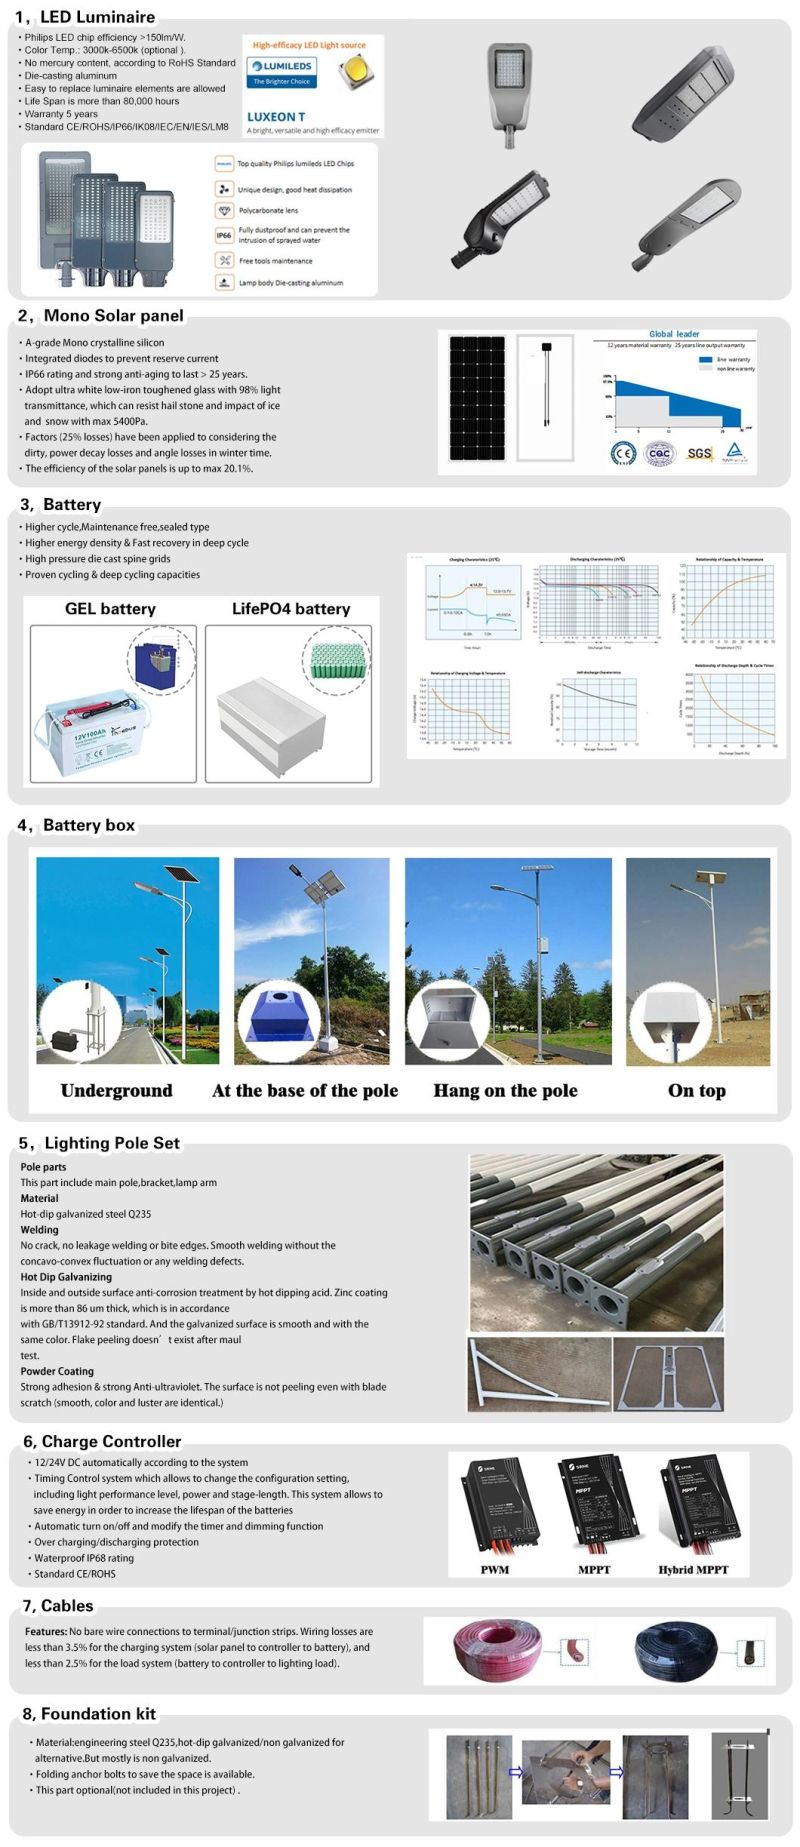 China Manufacturer 10m Pole Double 80W LED Power Outdoor Top Battery Split Solar Street Light Road Lamp